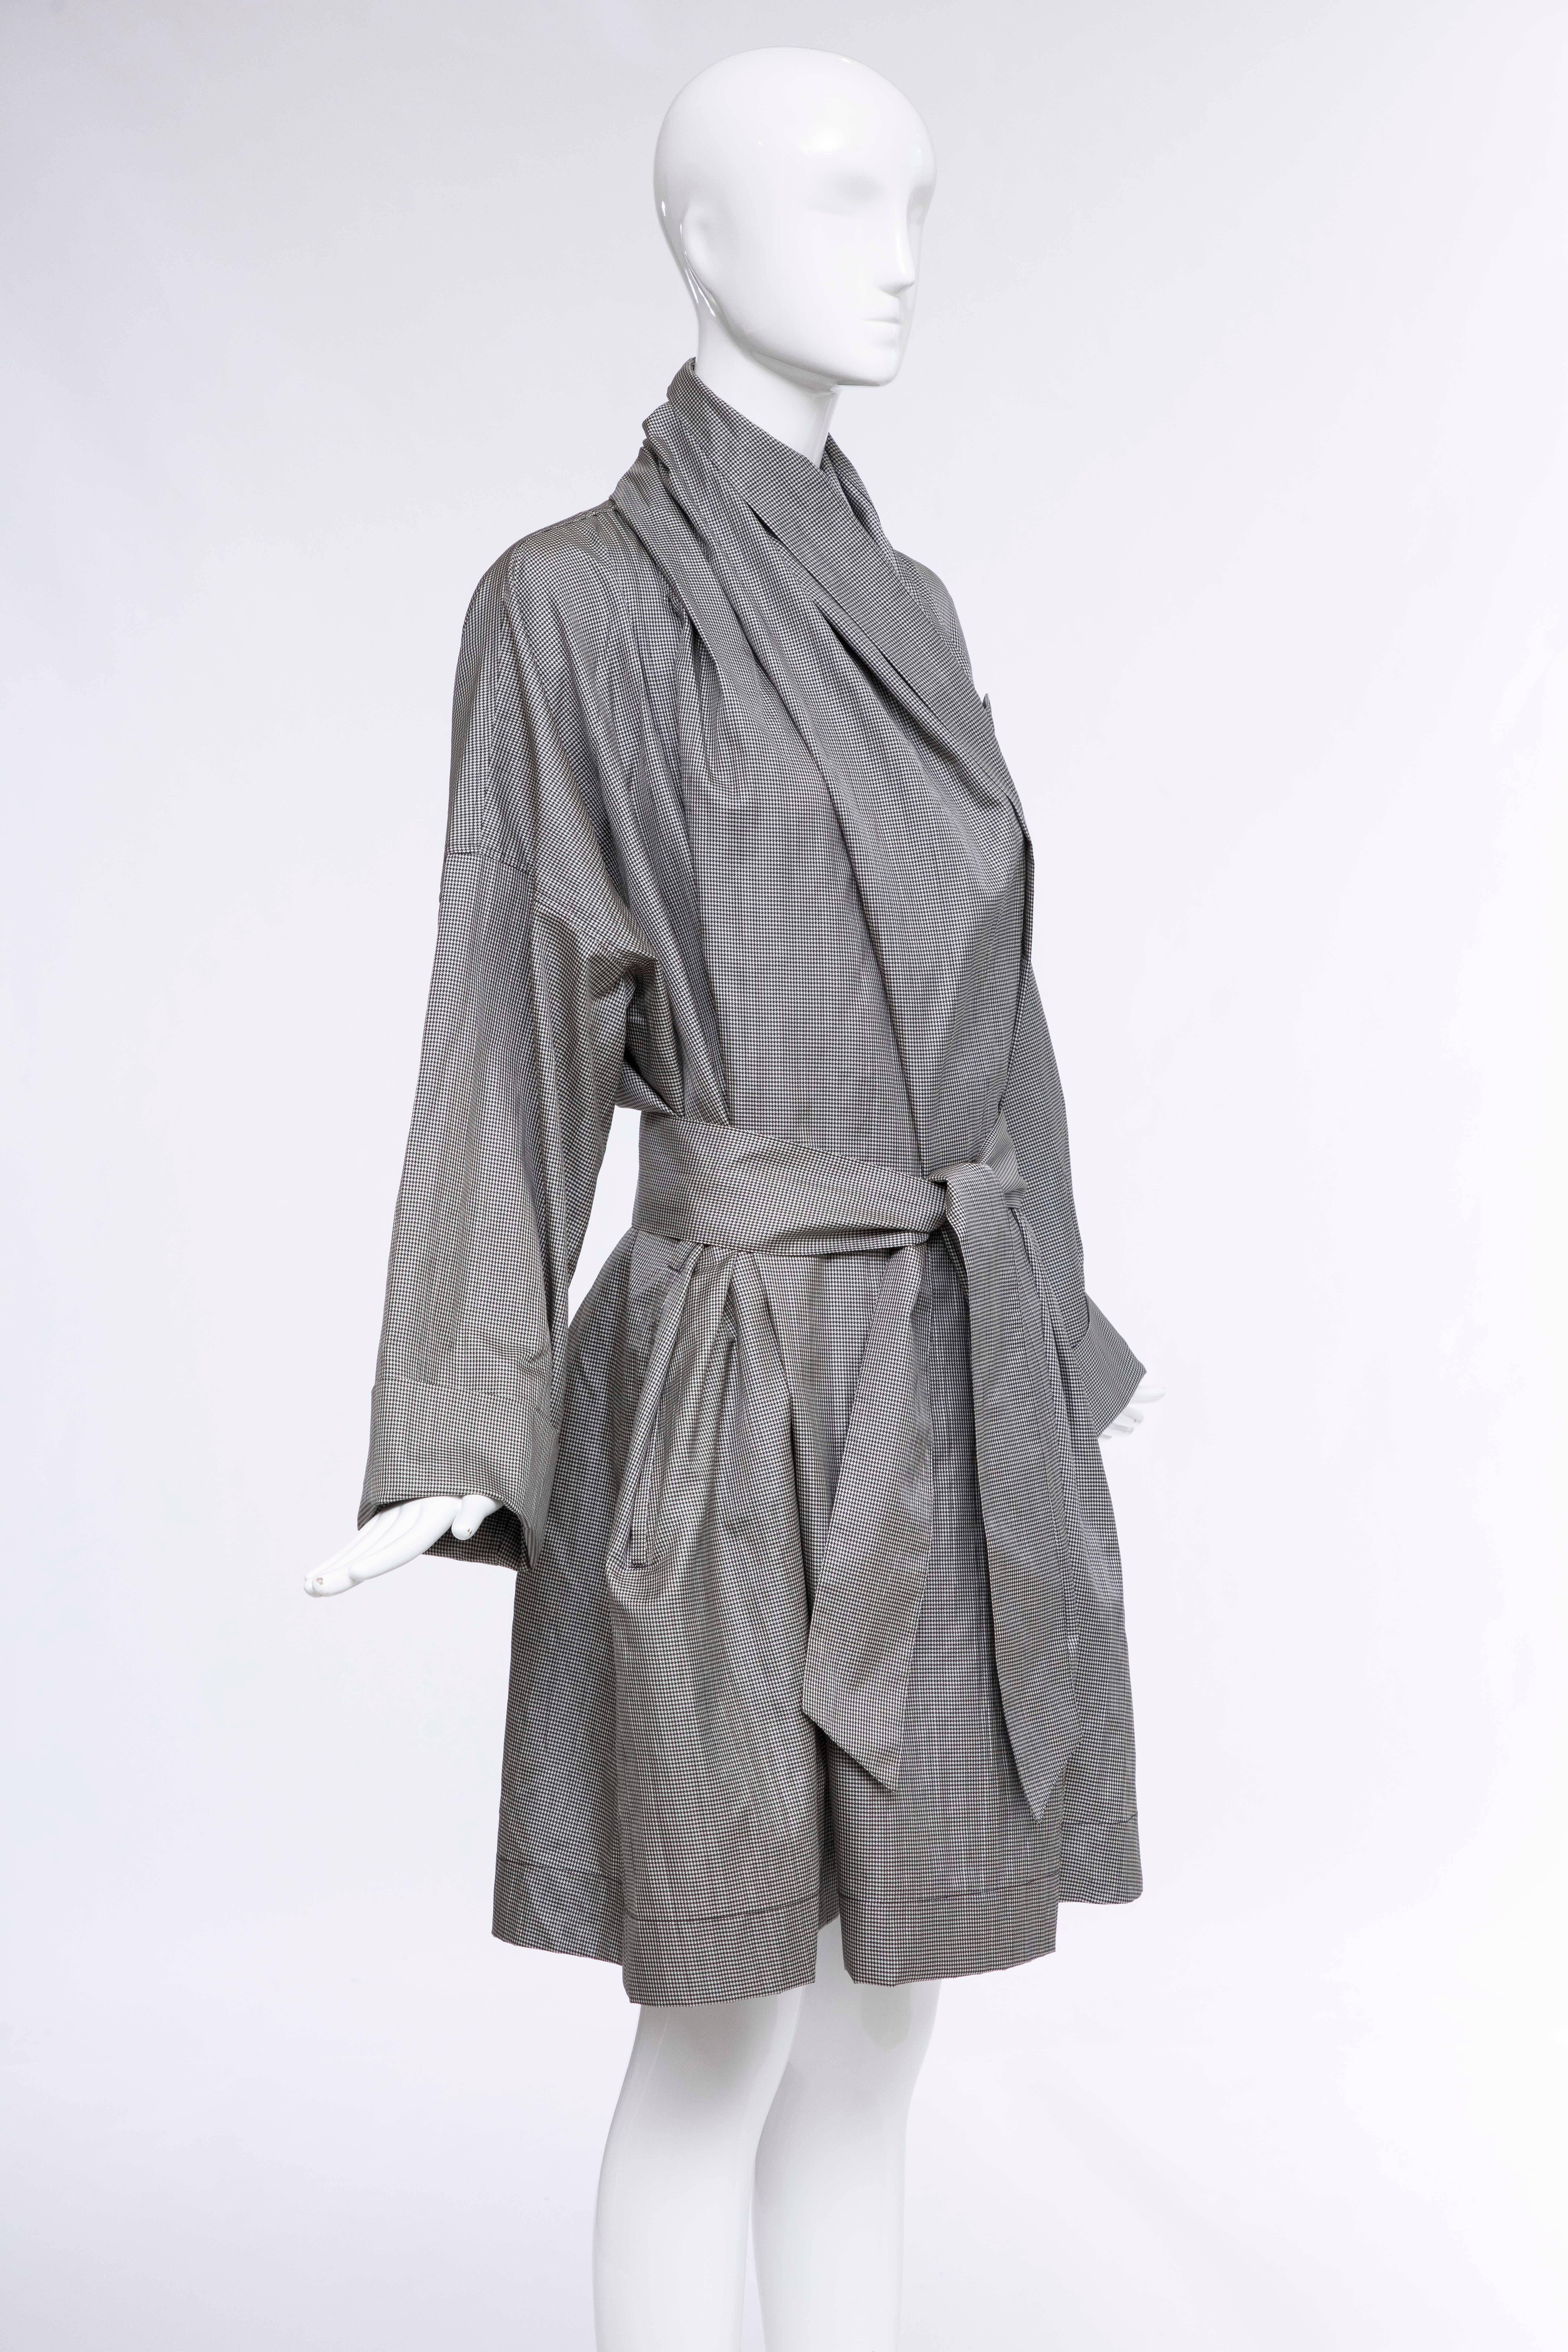 Issey Miyake Houndstooth Trench Coat Metropolitan of Art Collection, Circa 1985 In Excellent Condition For Sale In Cincinnati, OH